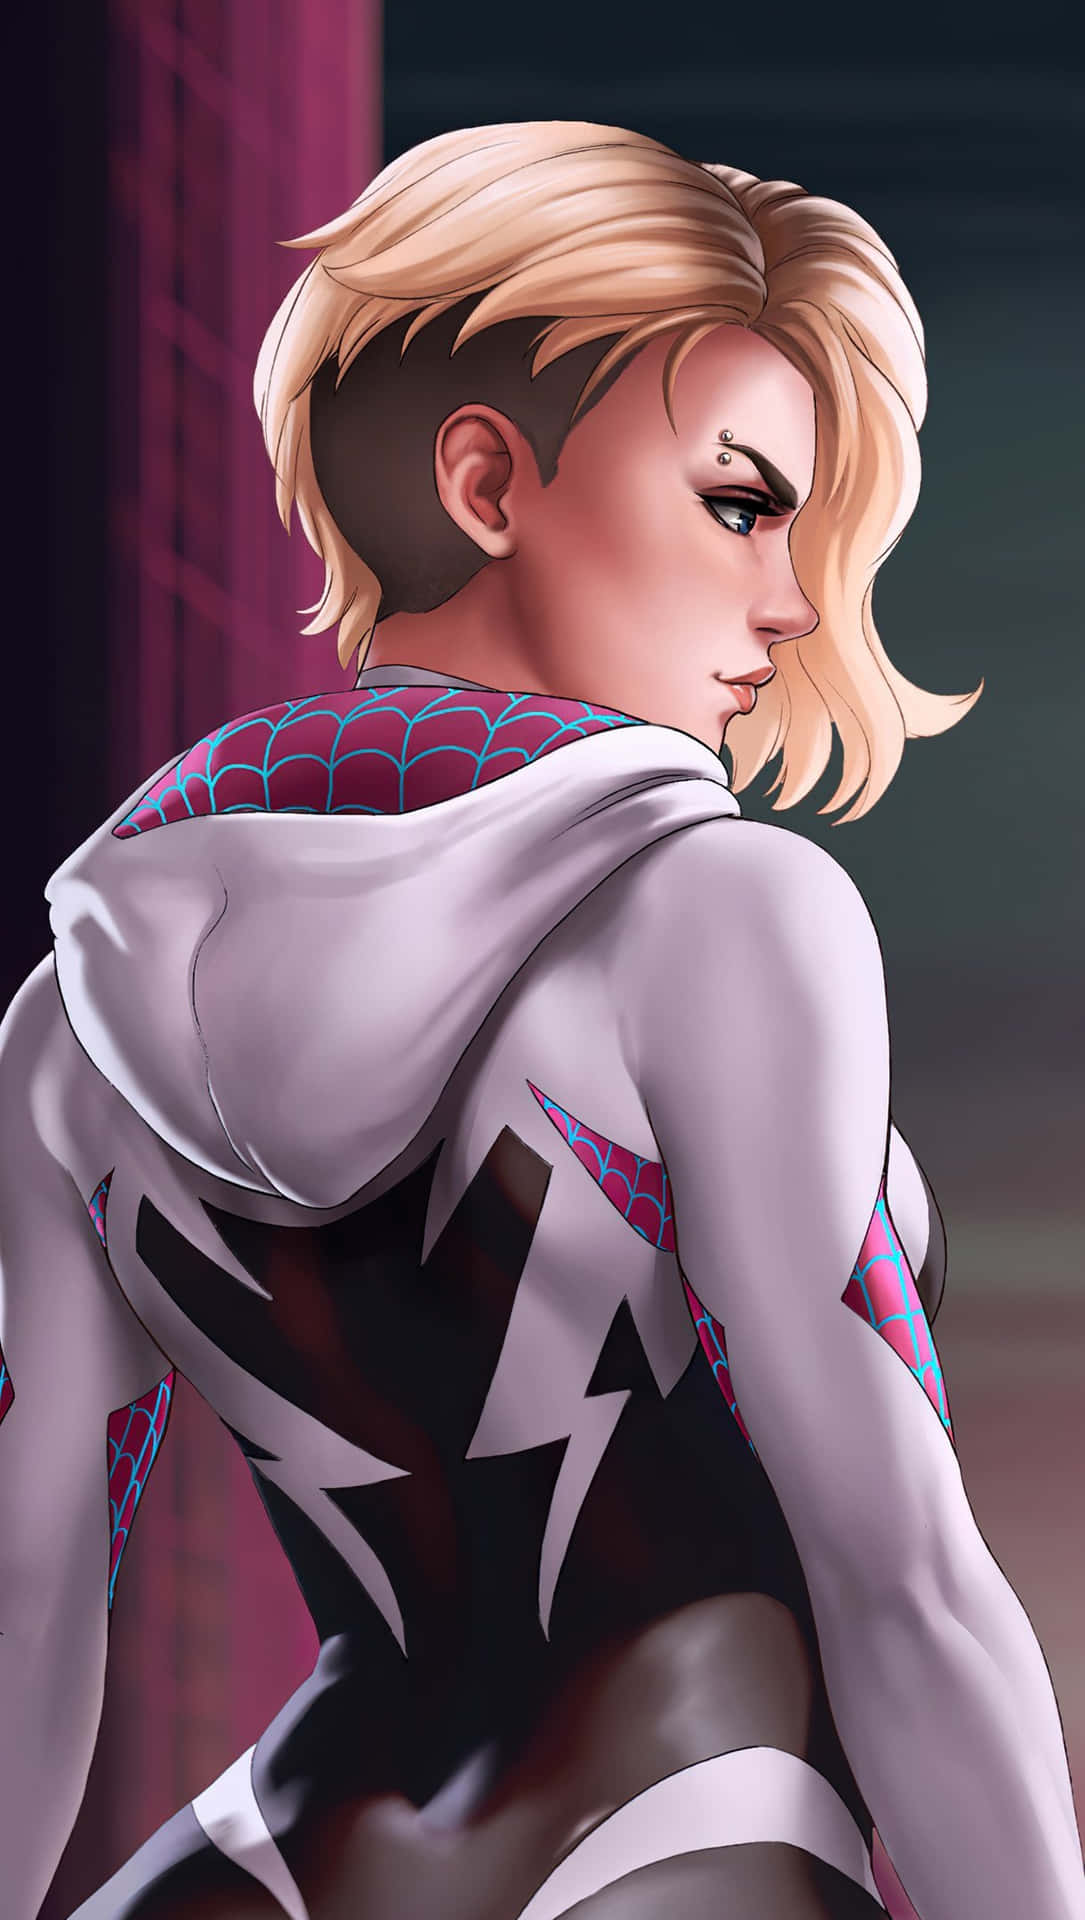 Into the Spiderverse with Spider-Gwen!